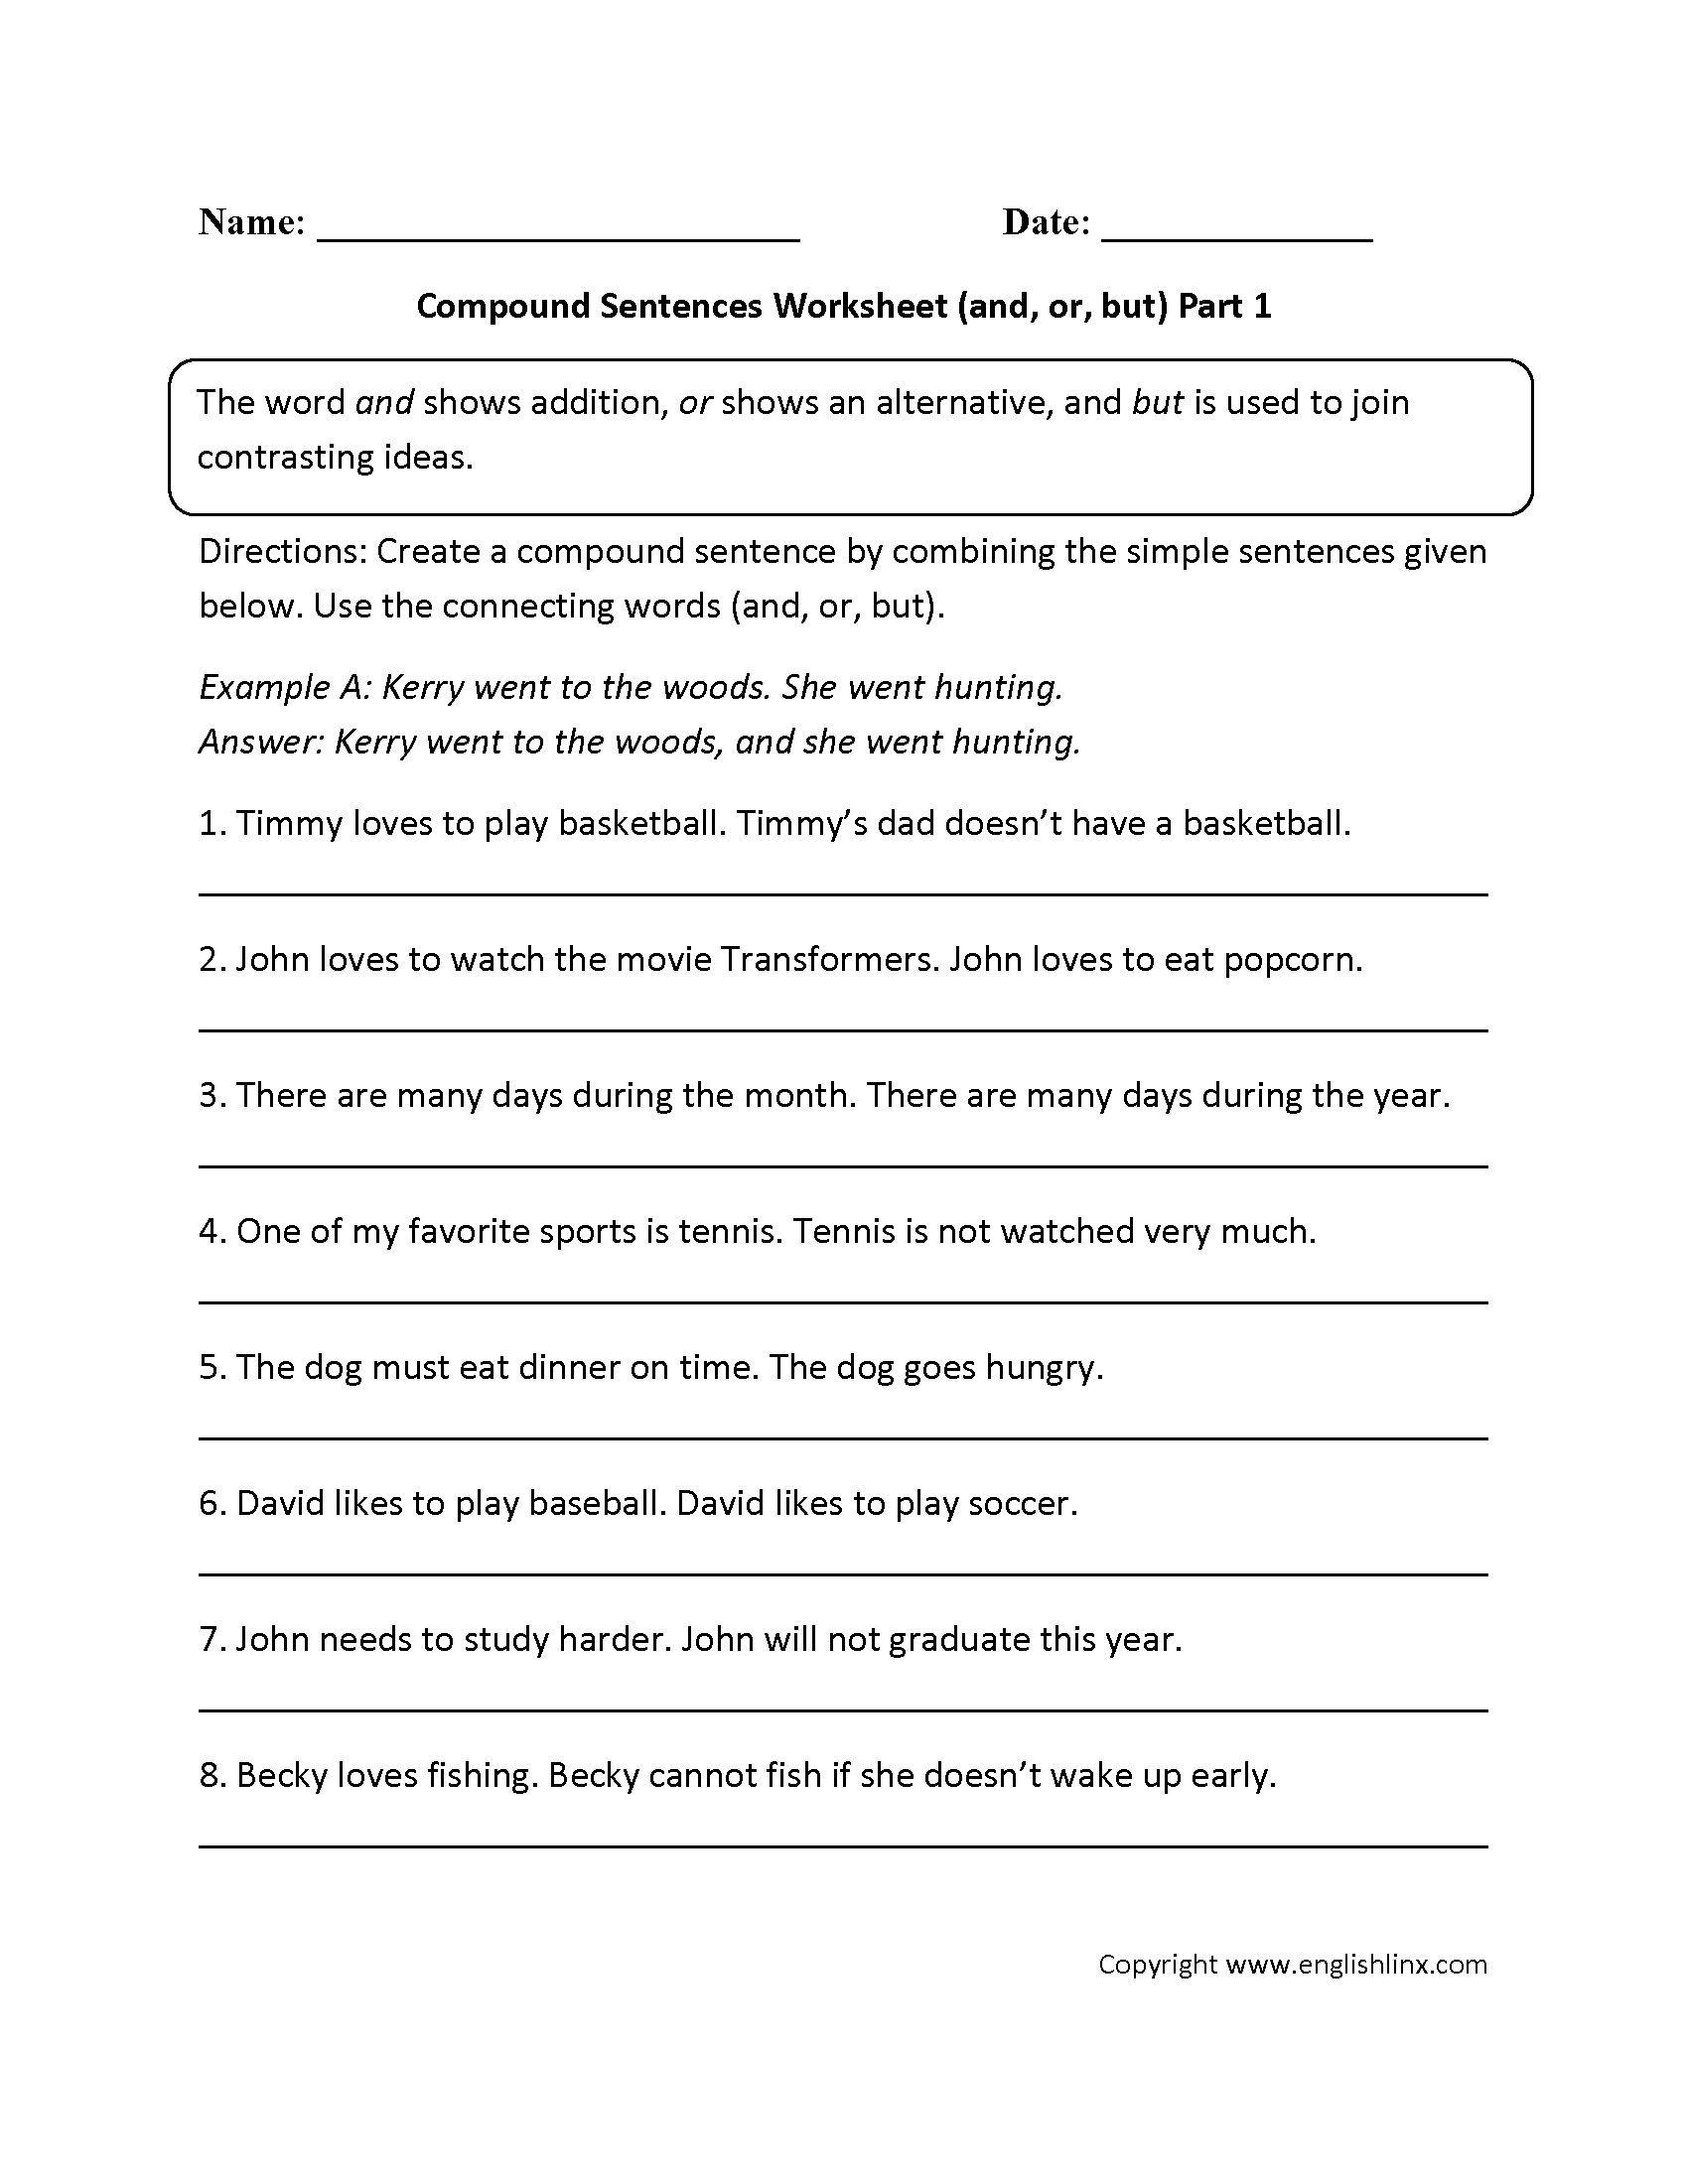 Compound Sentences Worksheets And Or And But Compound Sentences